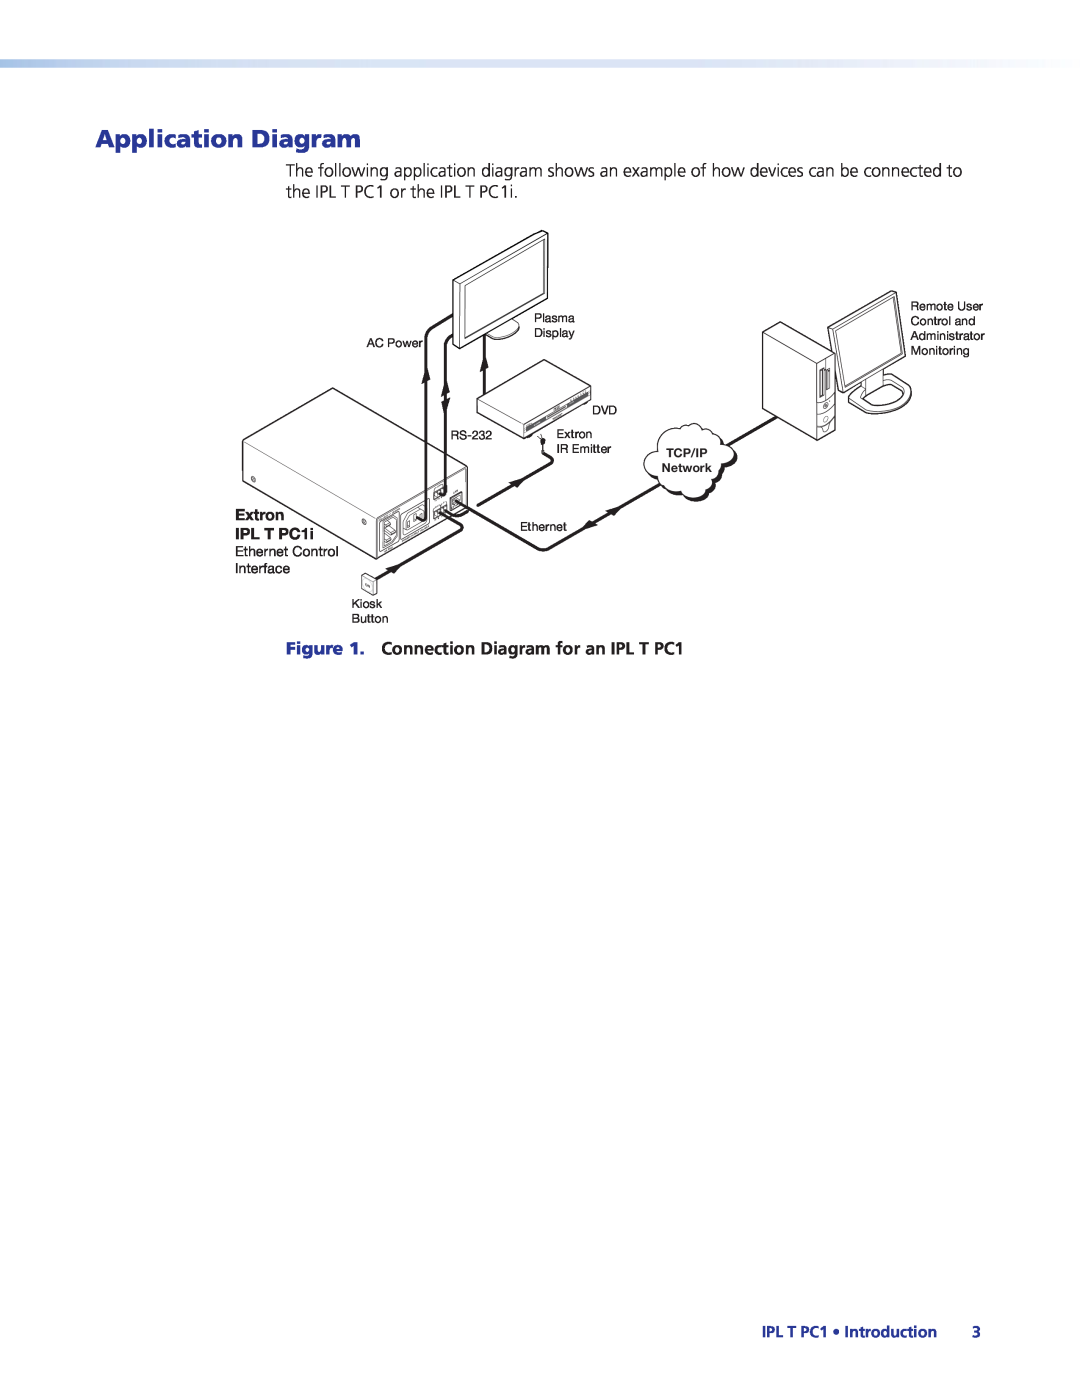 Extron electronic IPL T PC1i manual Application Diagram, Connection Diagram for an IPL T PC1, IPL T PC1 Introduction 